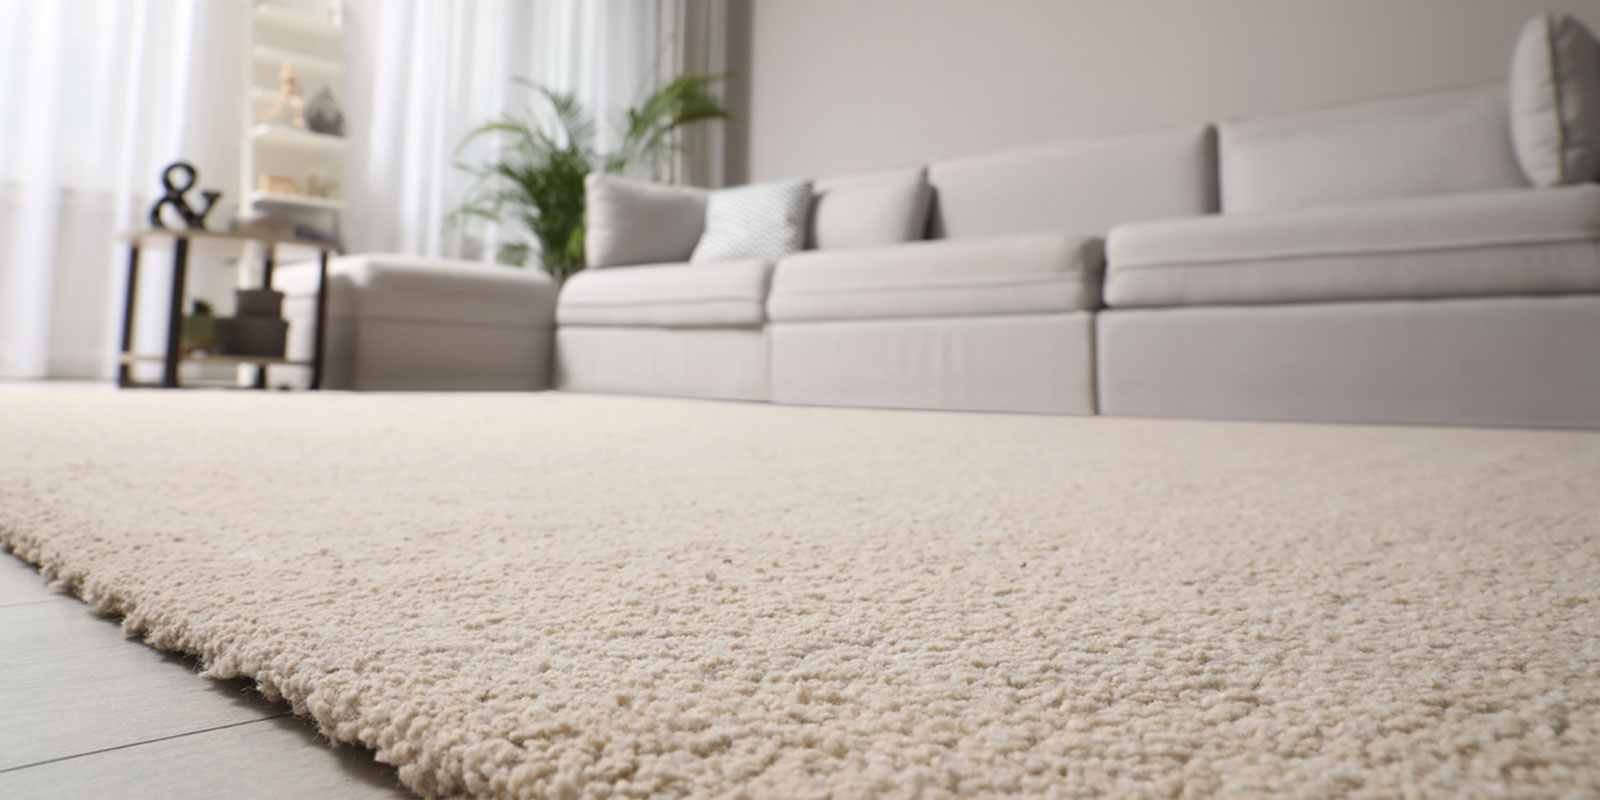 Easy Ways to Keep Your Carpet Clean Between Professional Carpet Cleanings